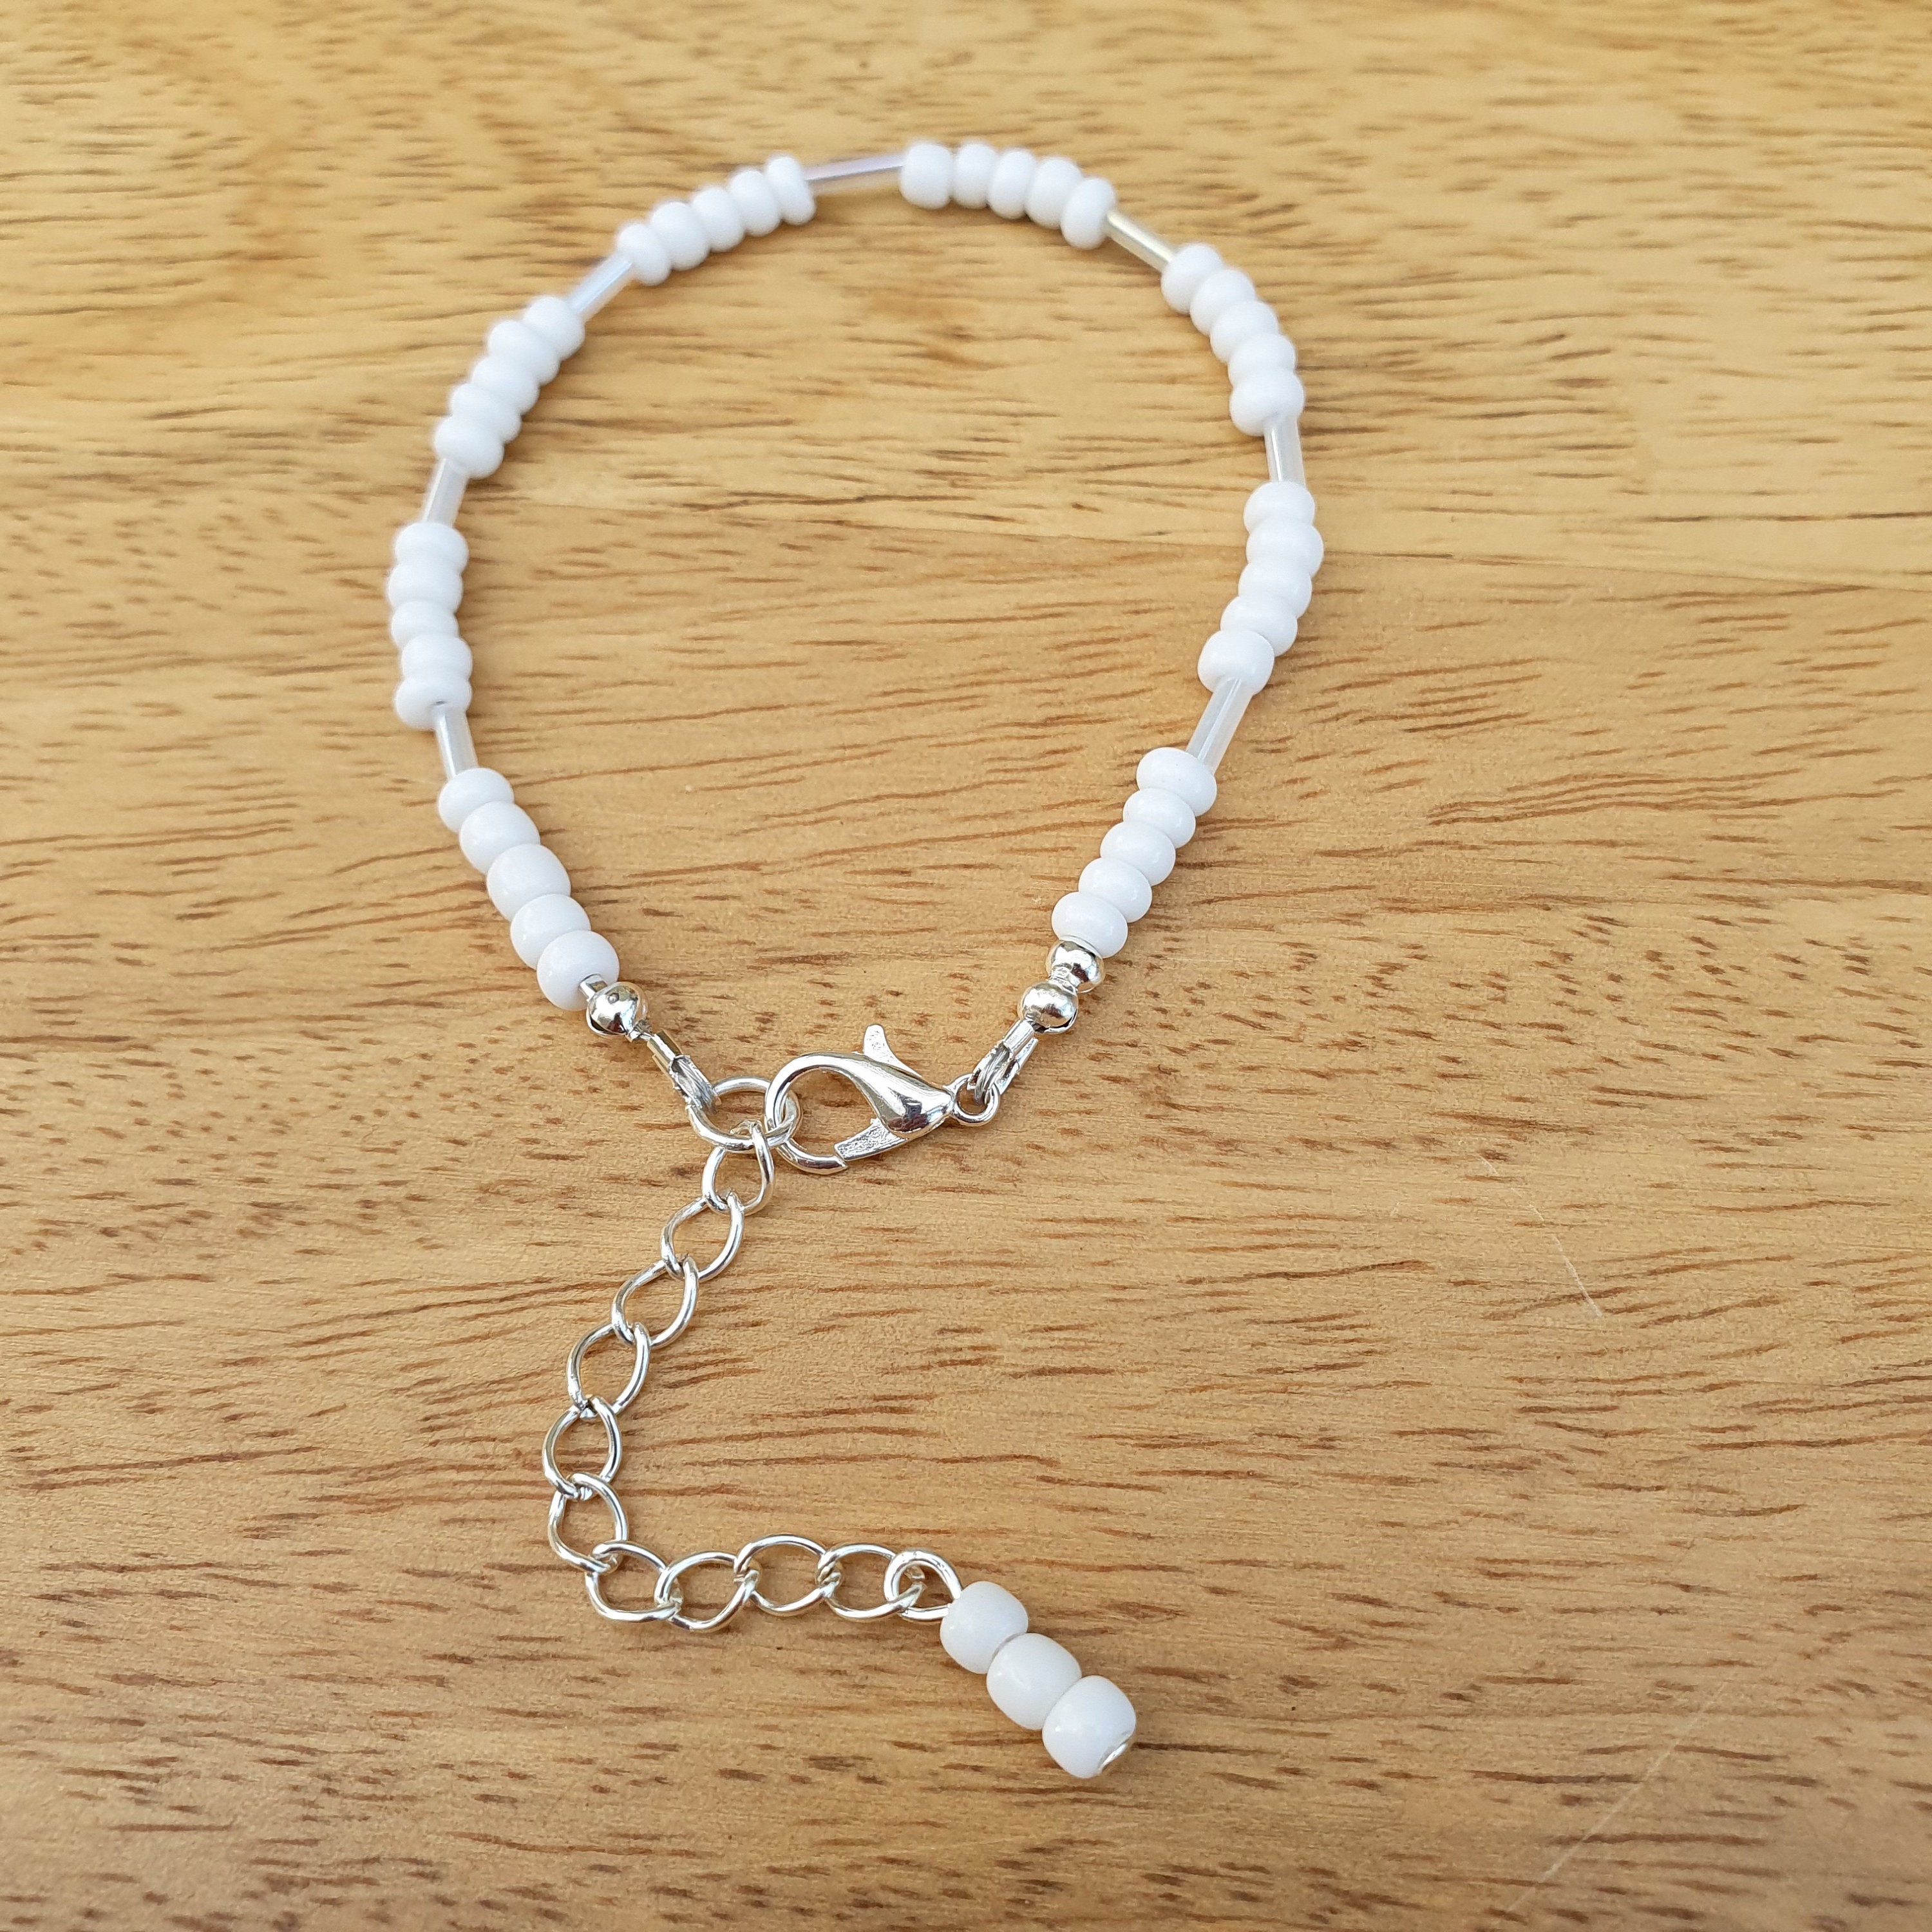 White seedbead and buglebead long necklace and bracelet | Etsy